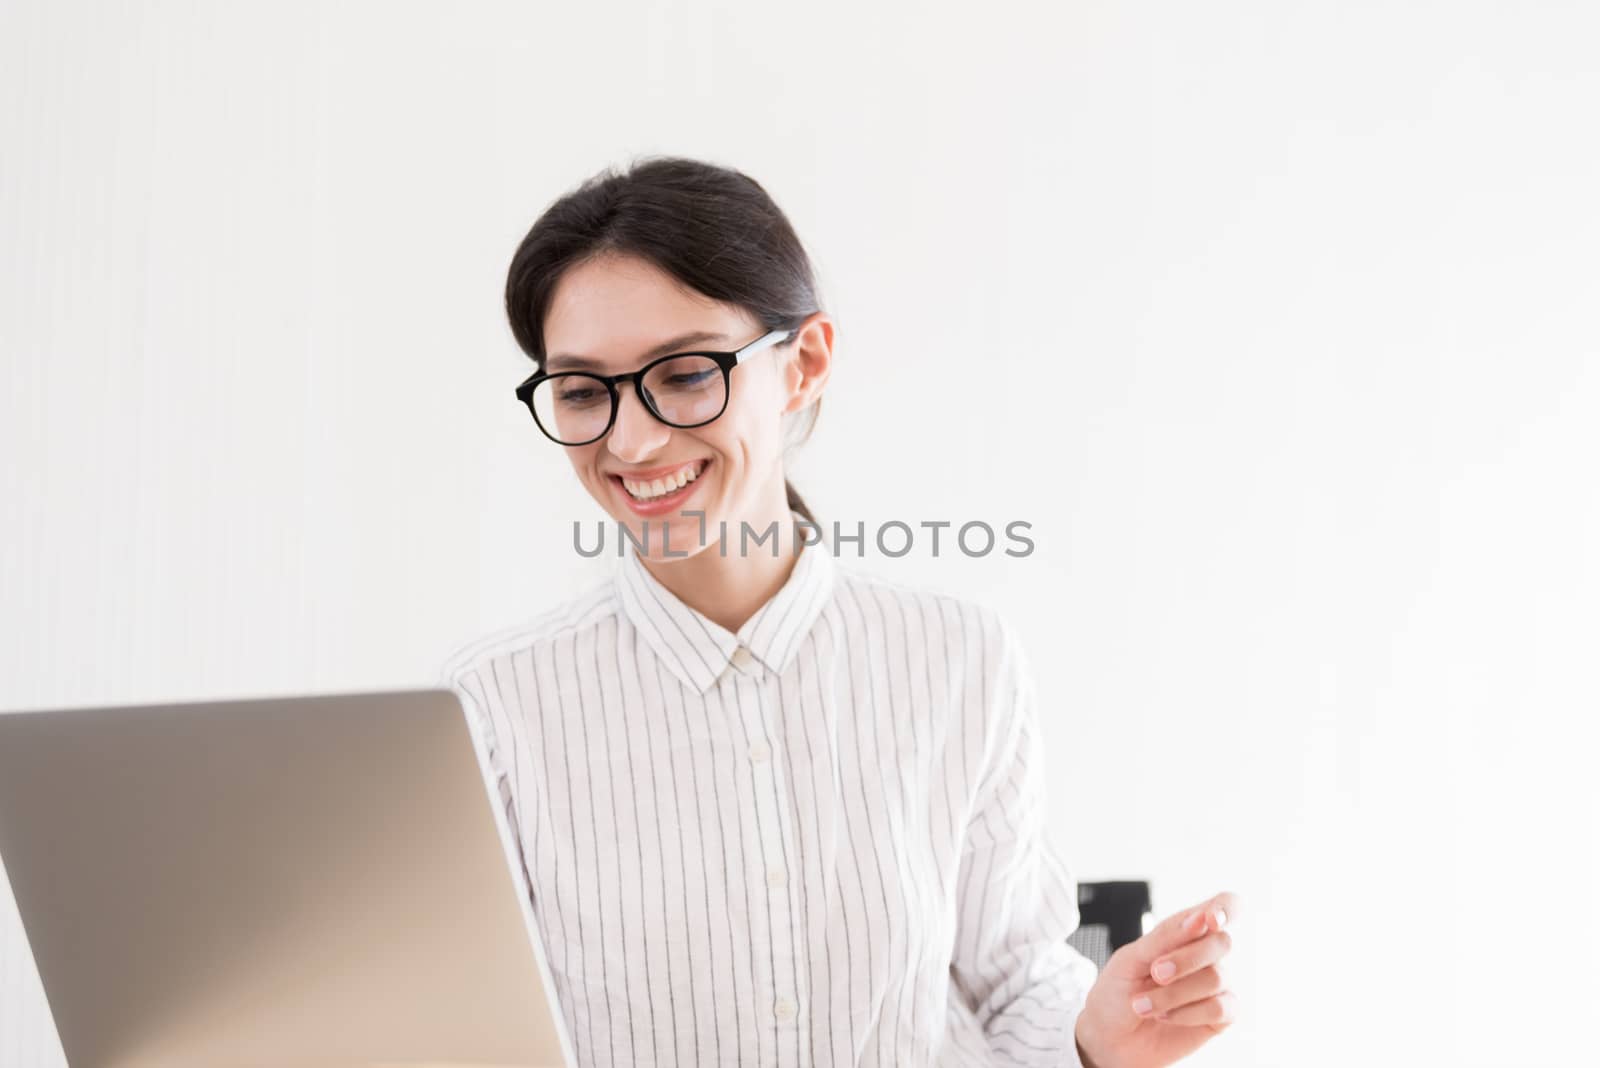 A businesswoman wearing glasses working with smiling and happiness at the office.